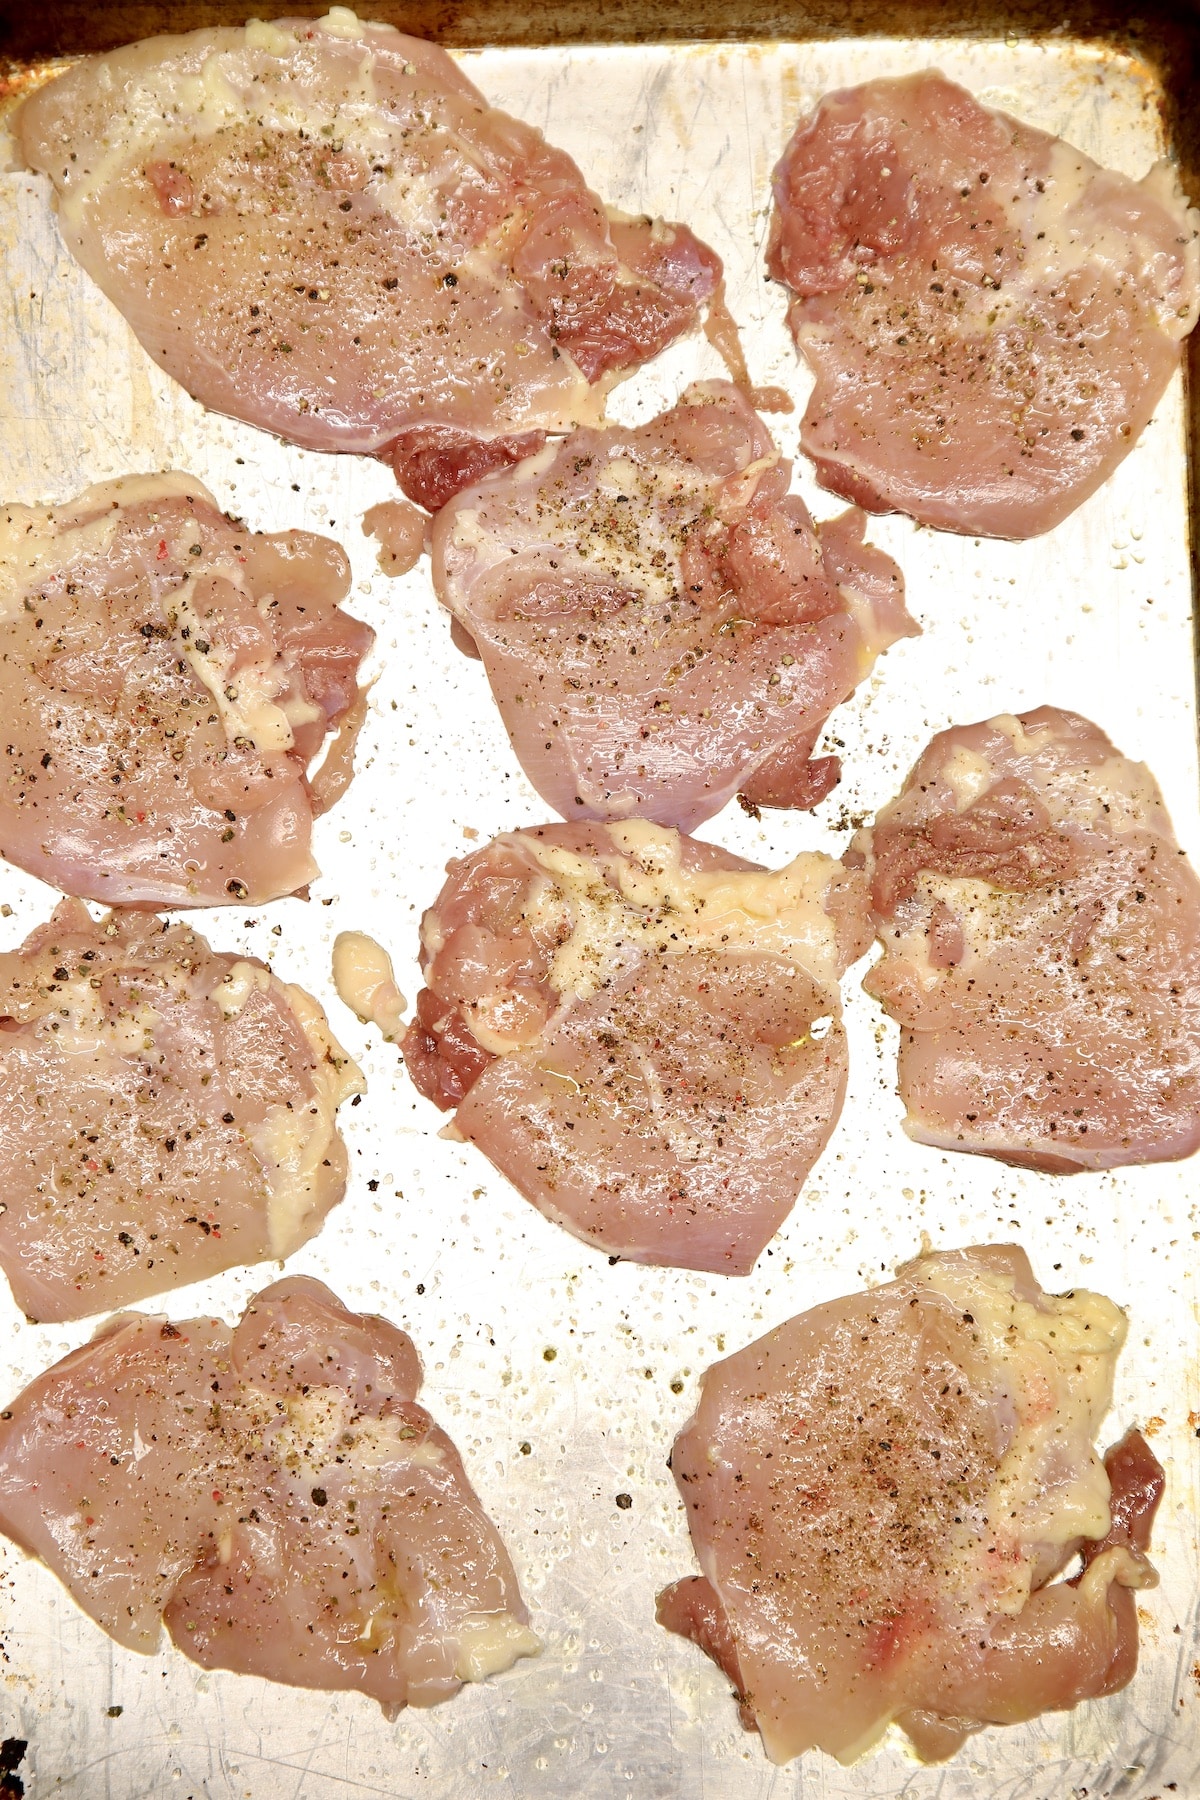 Raw boneless skinless chicken thighs seasoned with salt and pepper on a baking sheet.